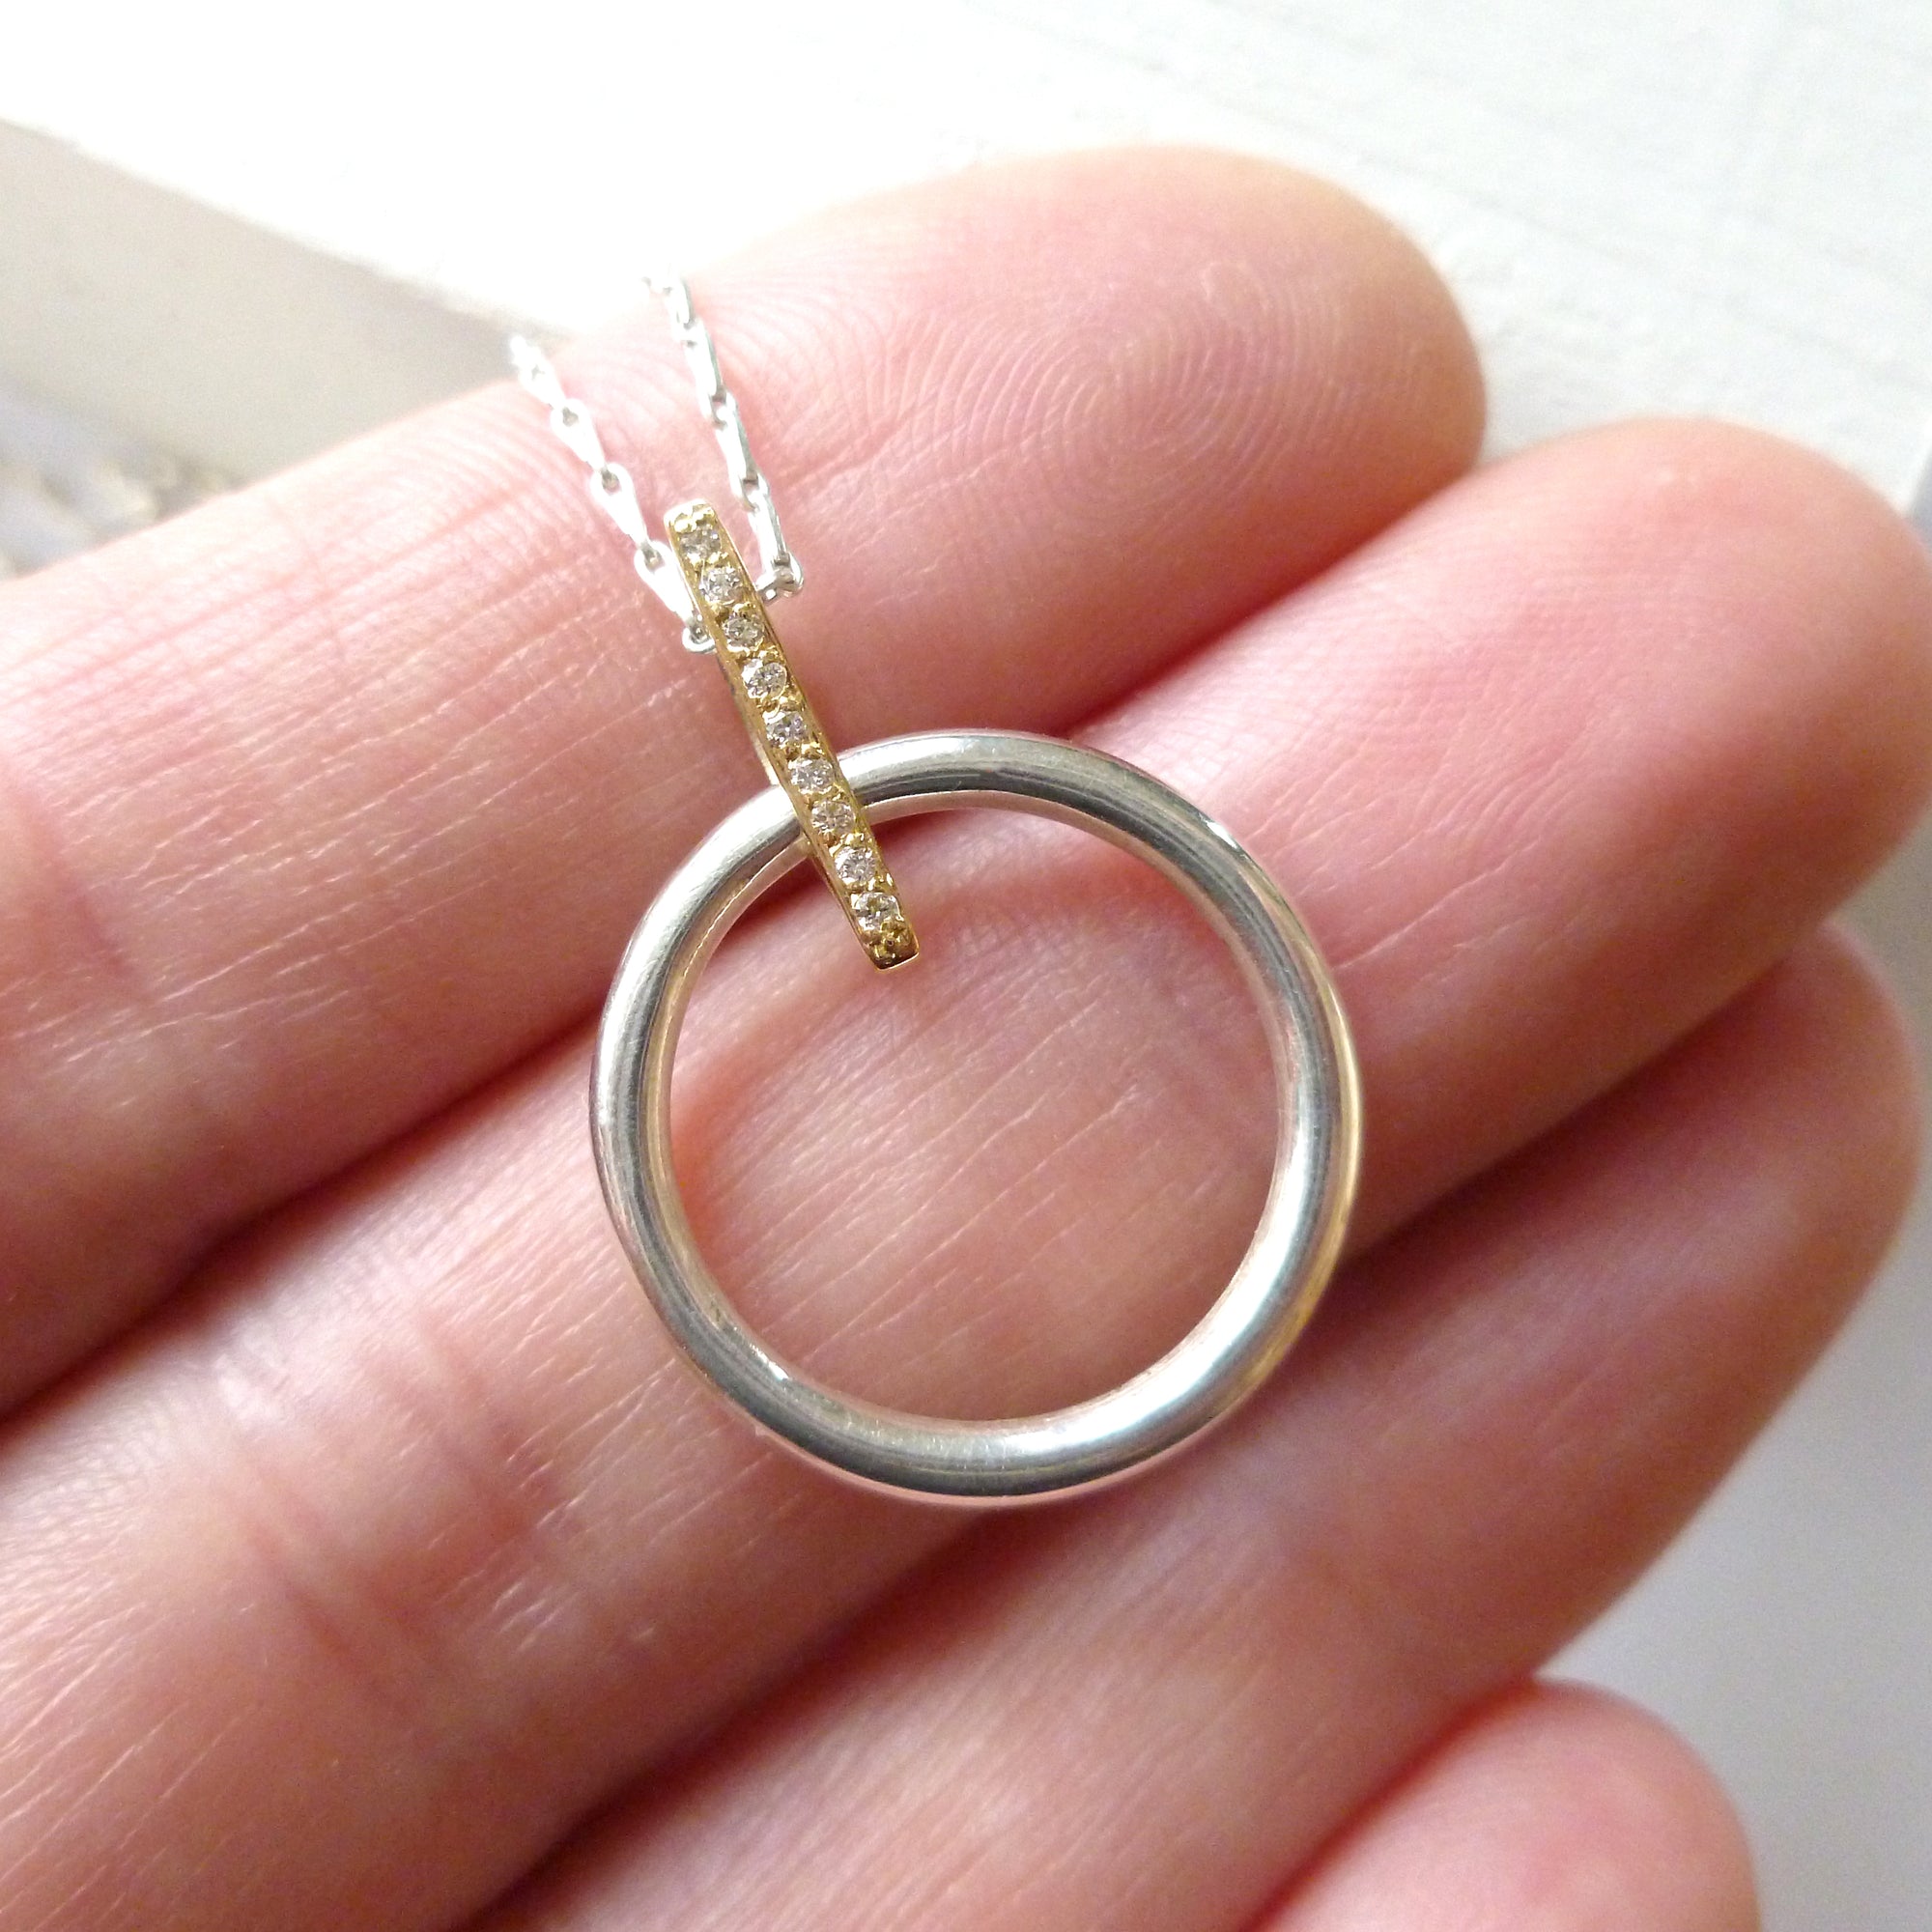 Custom heirloom pendant design—Parents wedding ring set w/center diamond as  gift from father who has since passed. : r/jewelrymaking